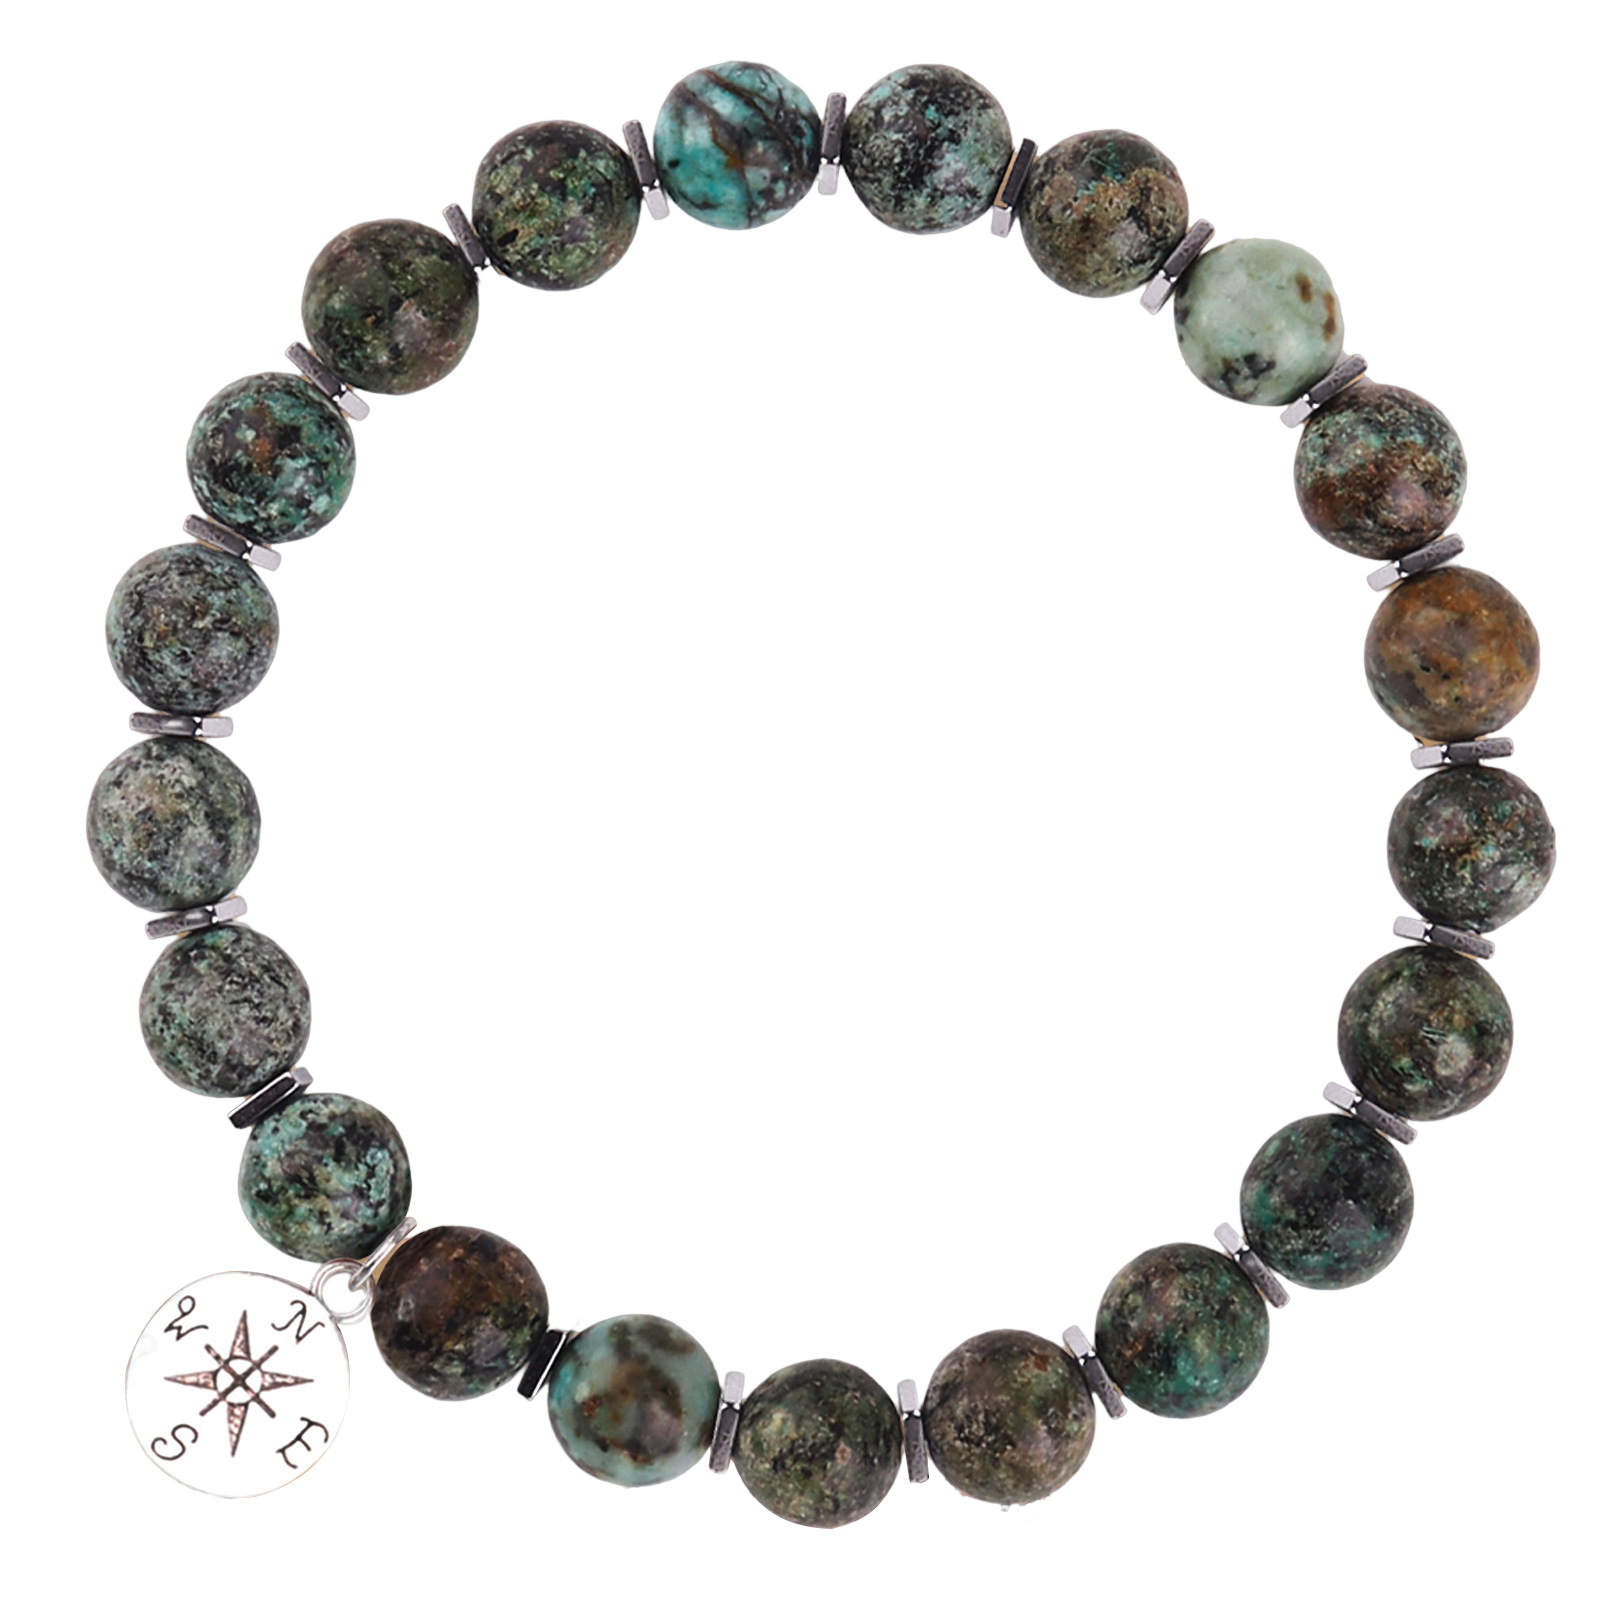 5:African Turquoise